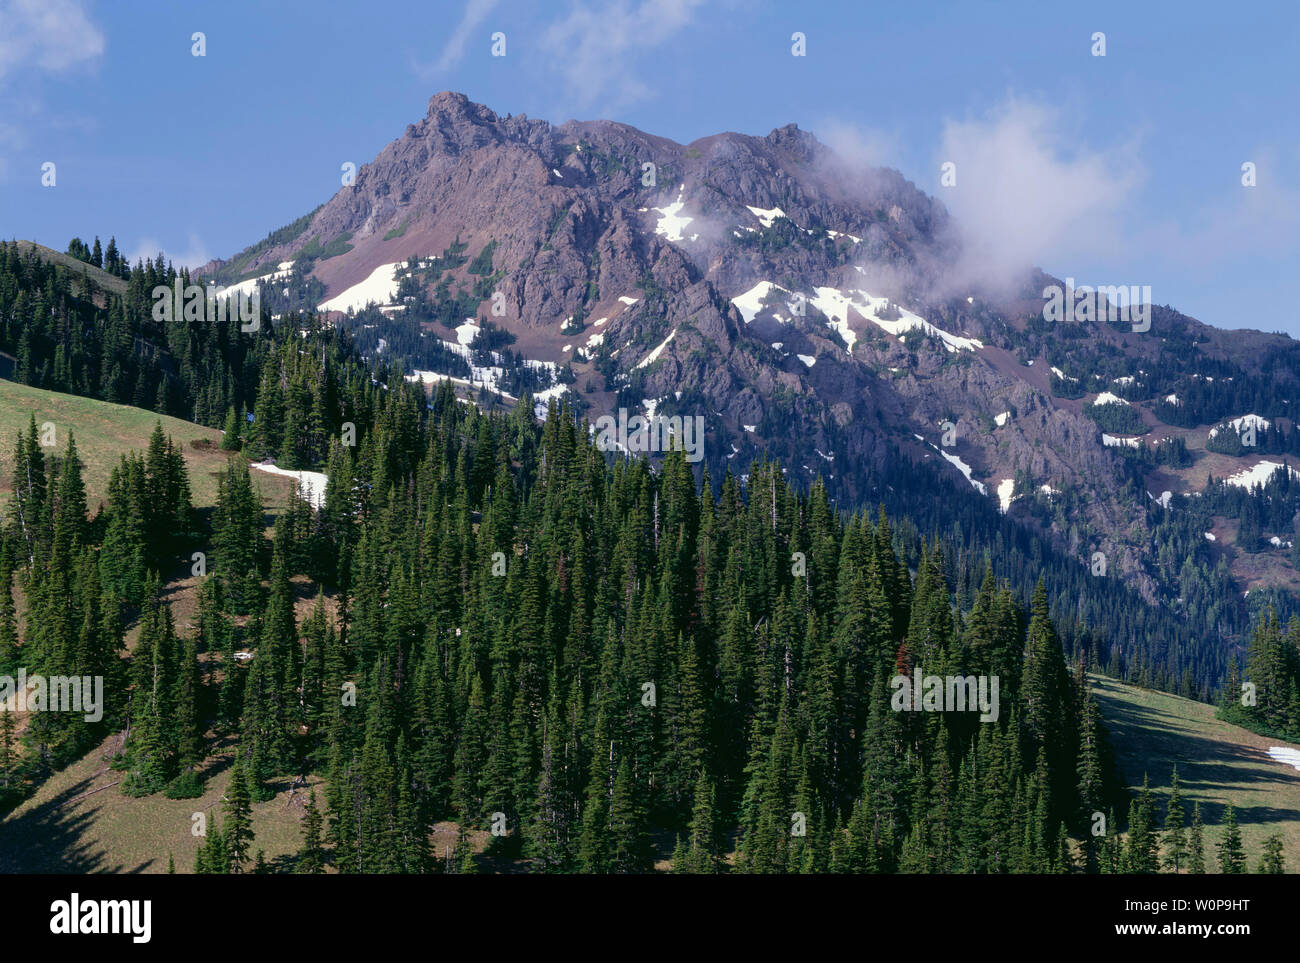 USA, Washington, Olympic National Park, Mt. Angeles rises beyond forest of subalpine fir in evening. Stock Photo